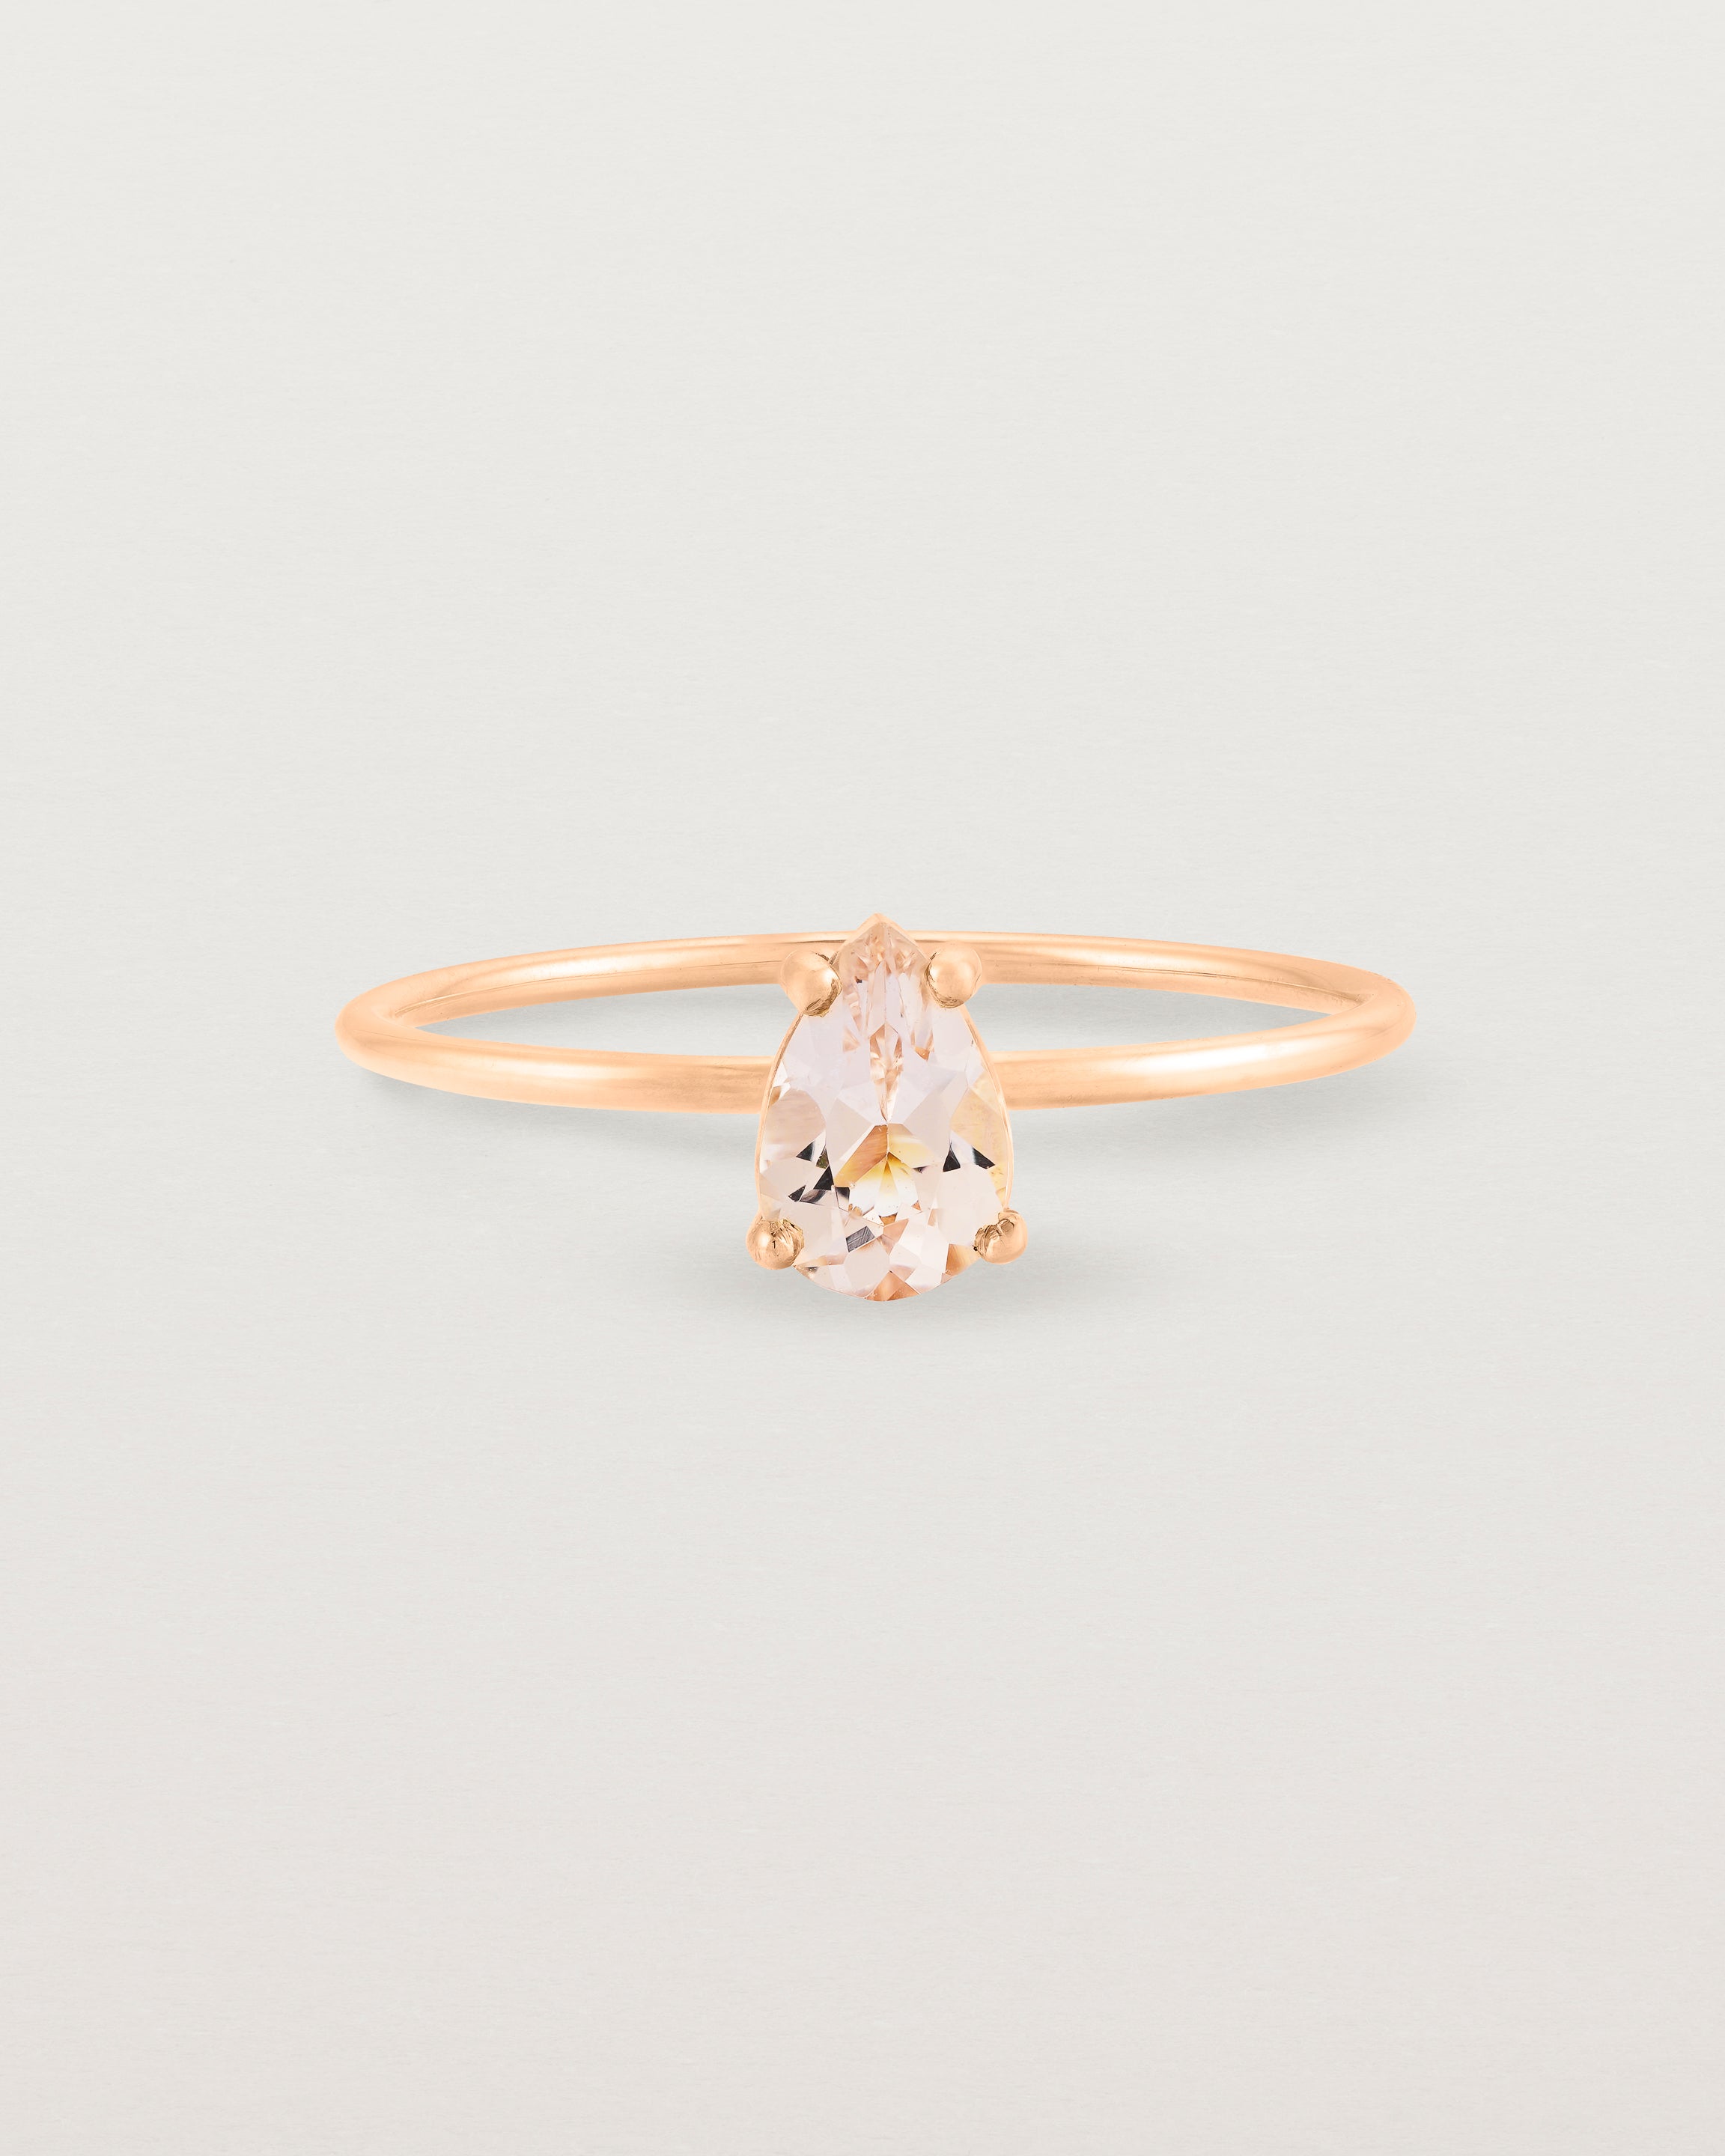 A fine rose gold ring featuring a pear shaped pink morganite stone